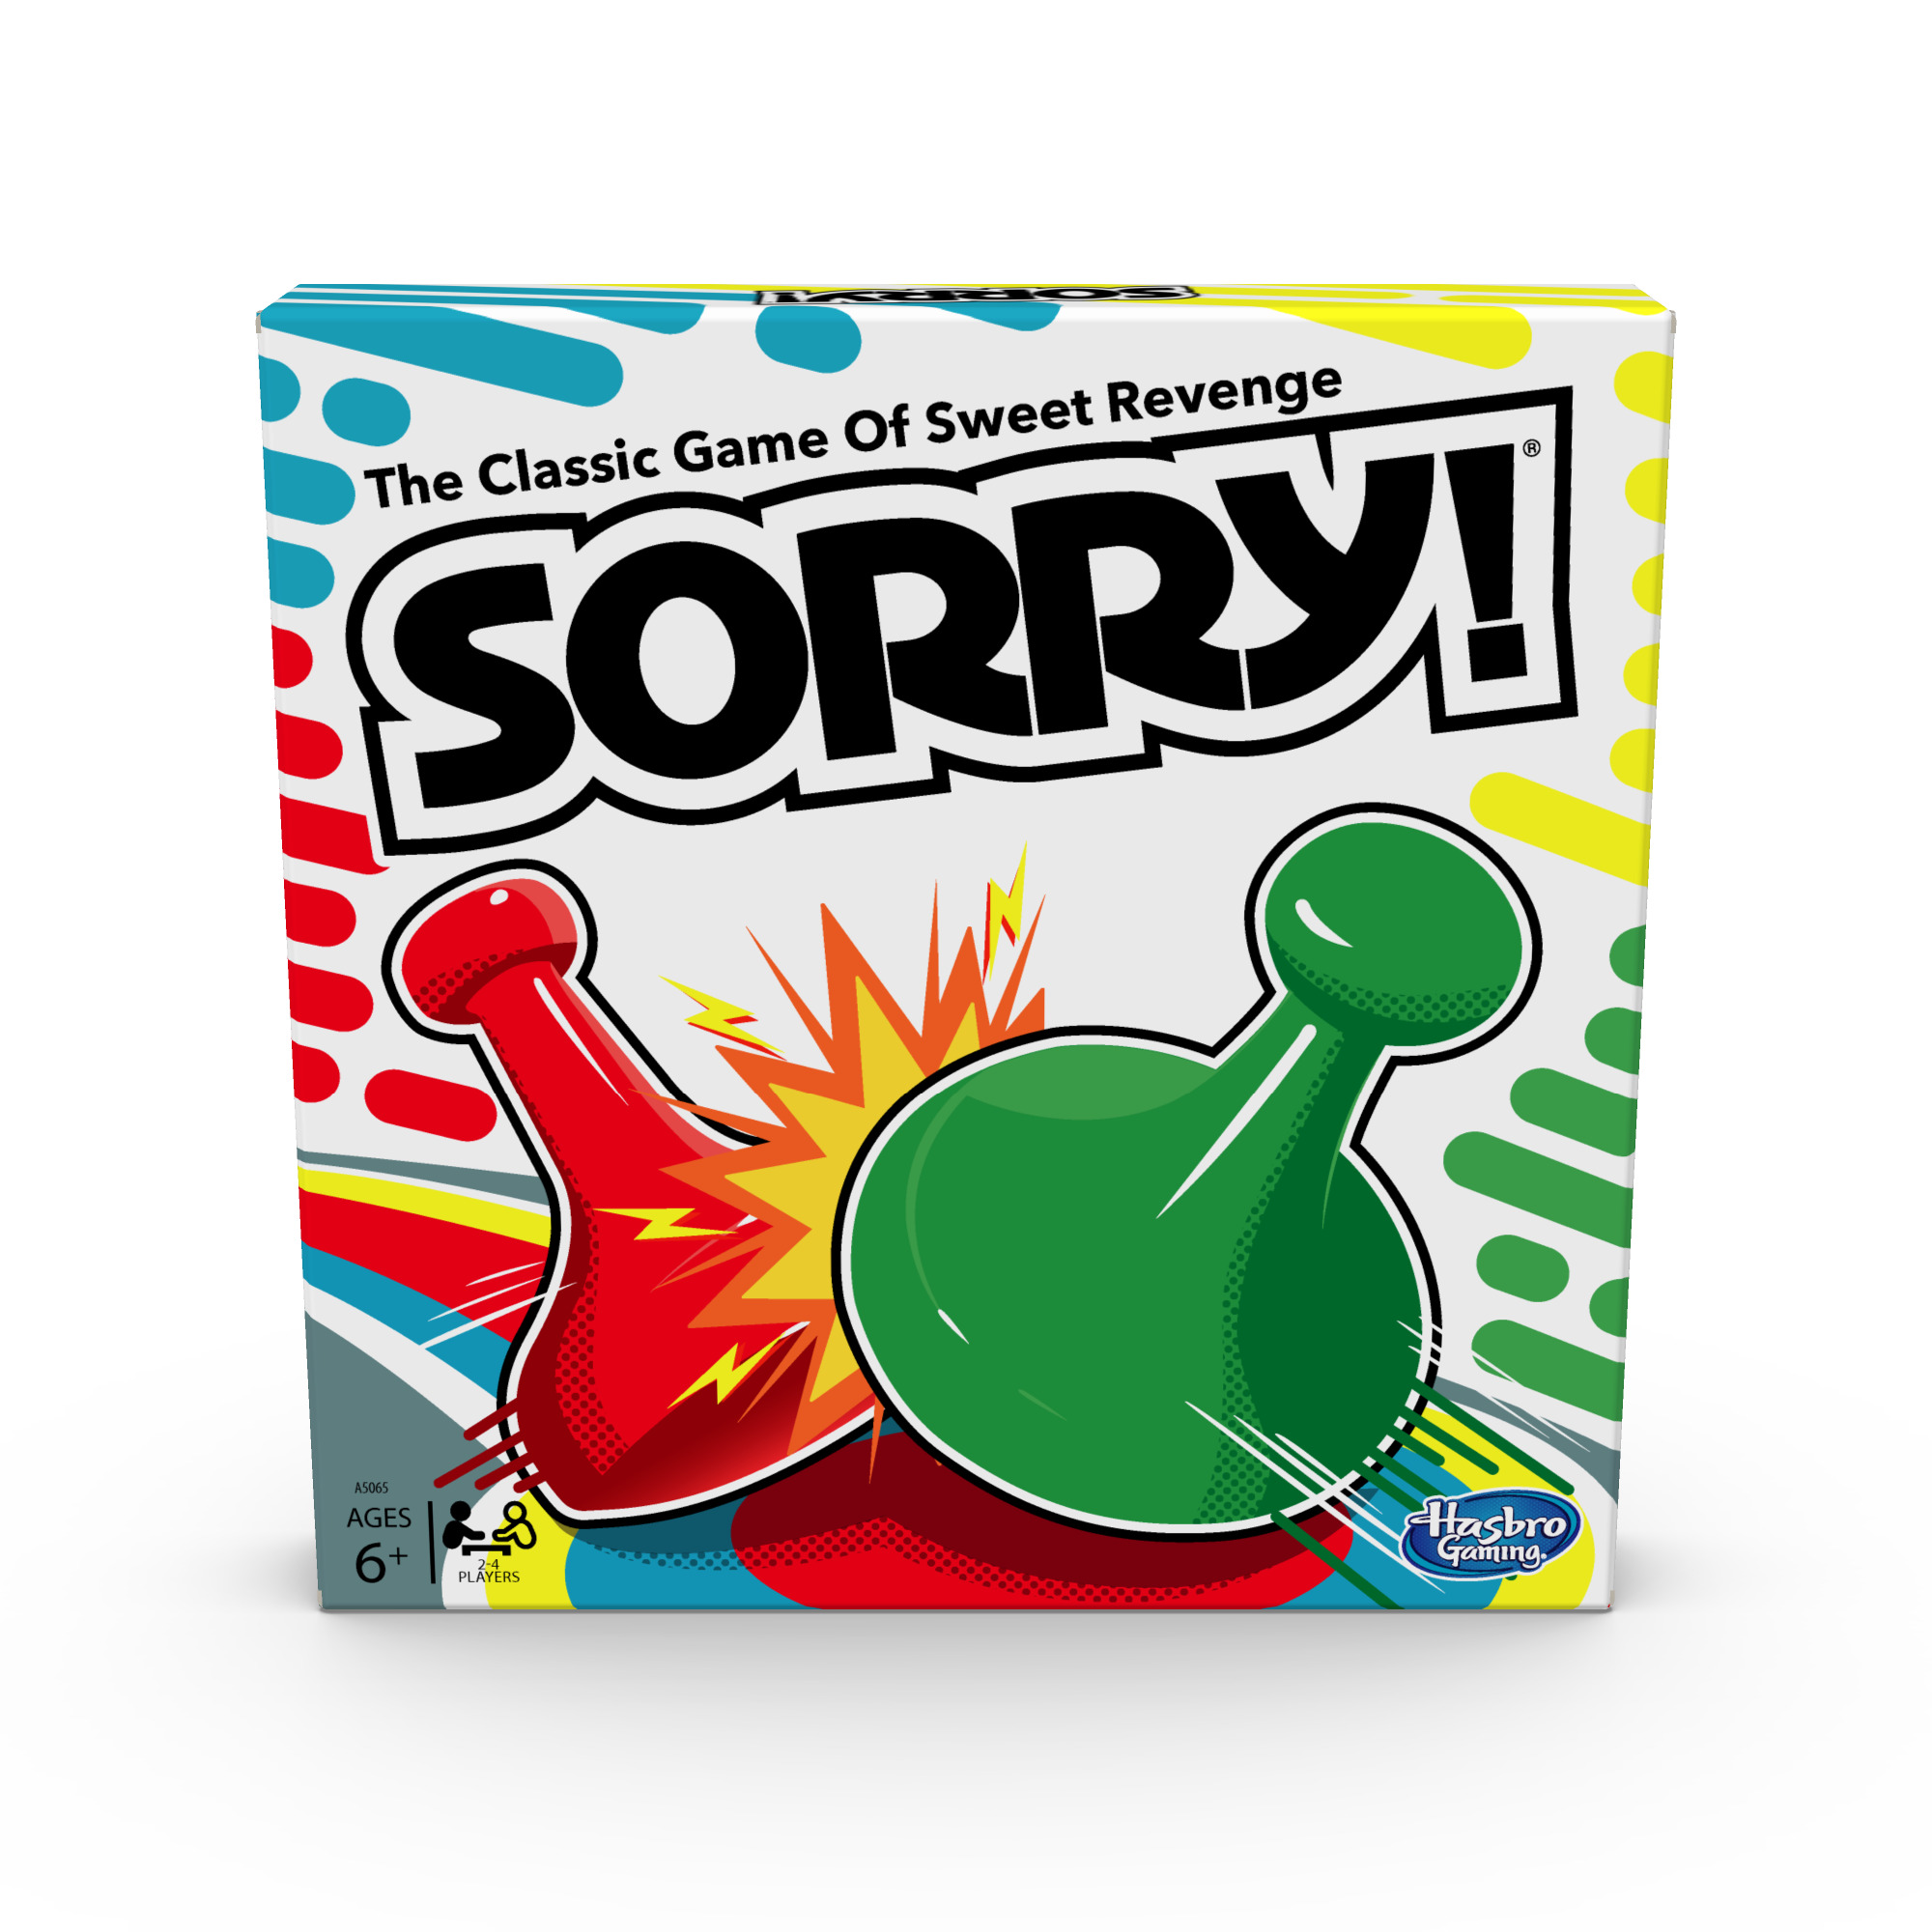 Sorry! Board Game for $7.45